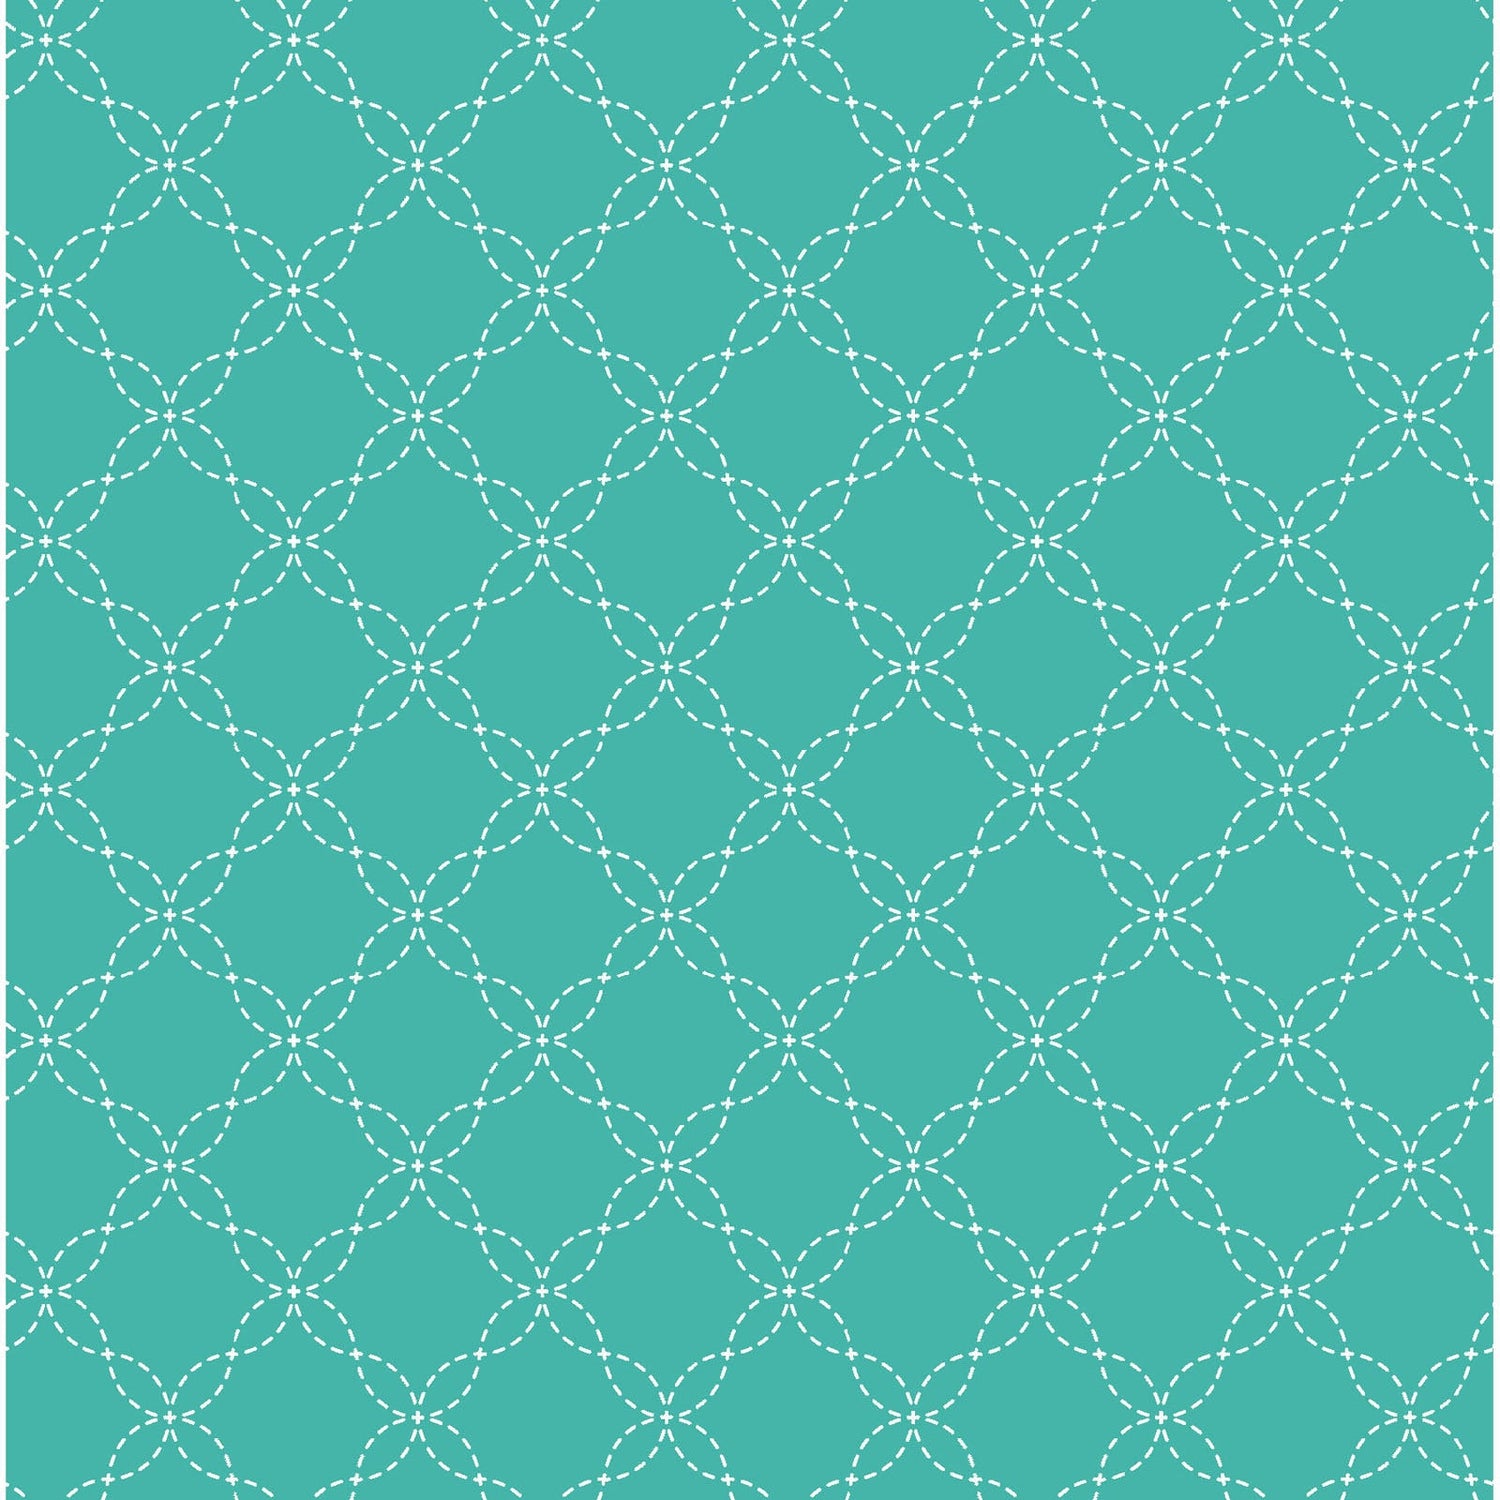 Teal Lattice Designed by Kim Christopherson of Kimberbell Designs for Maywood Studios